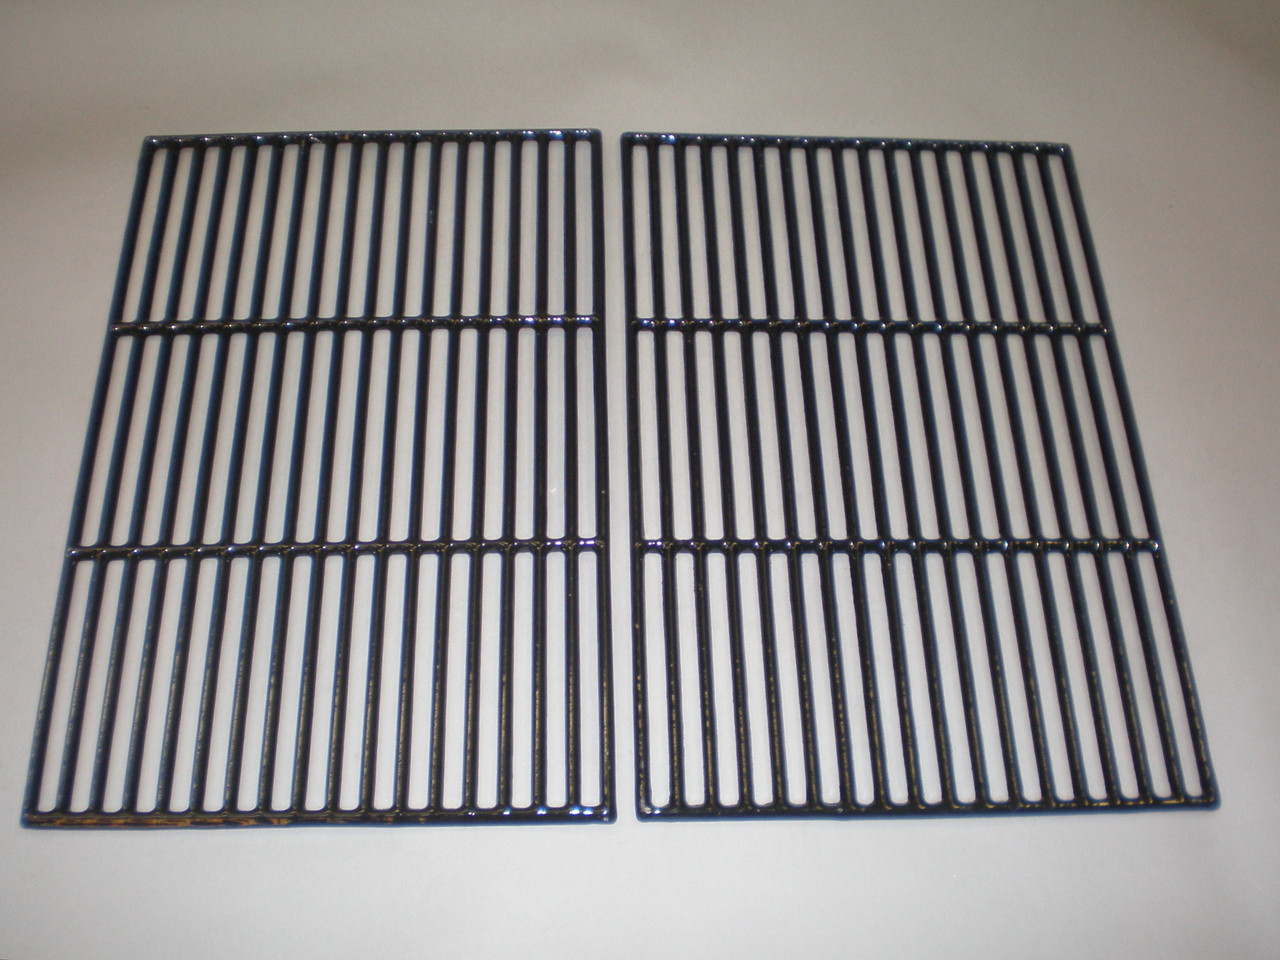 Porcelain Coated Cooking Grid Replacement for Brinkmann & Charmglow Models 3set 